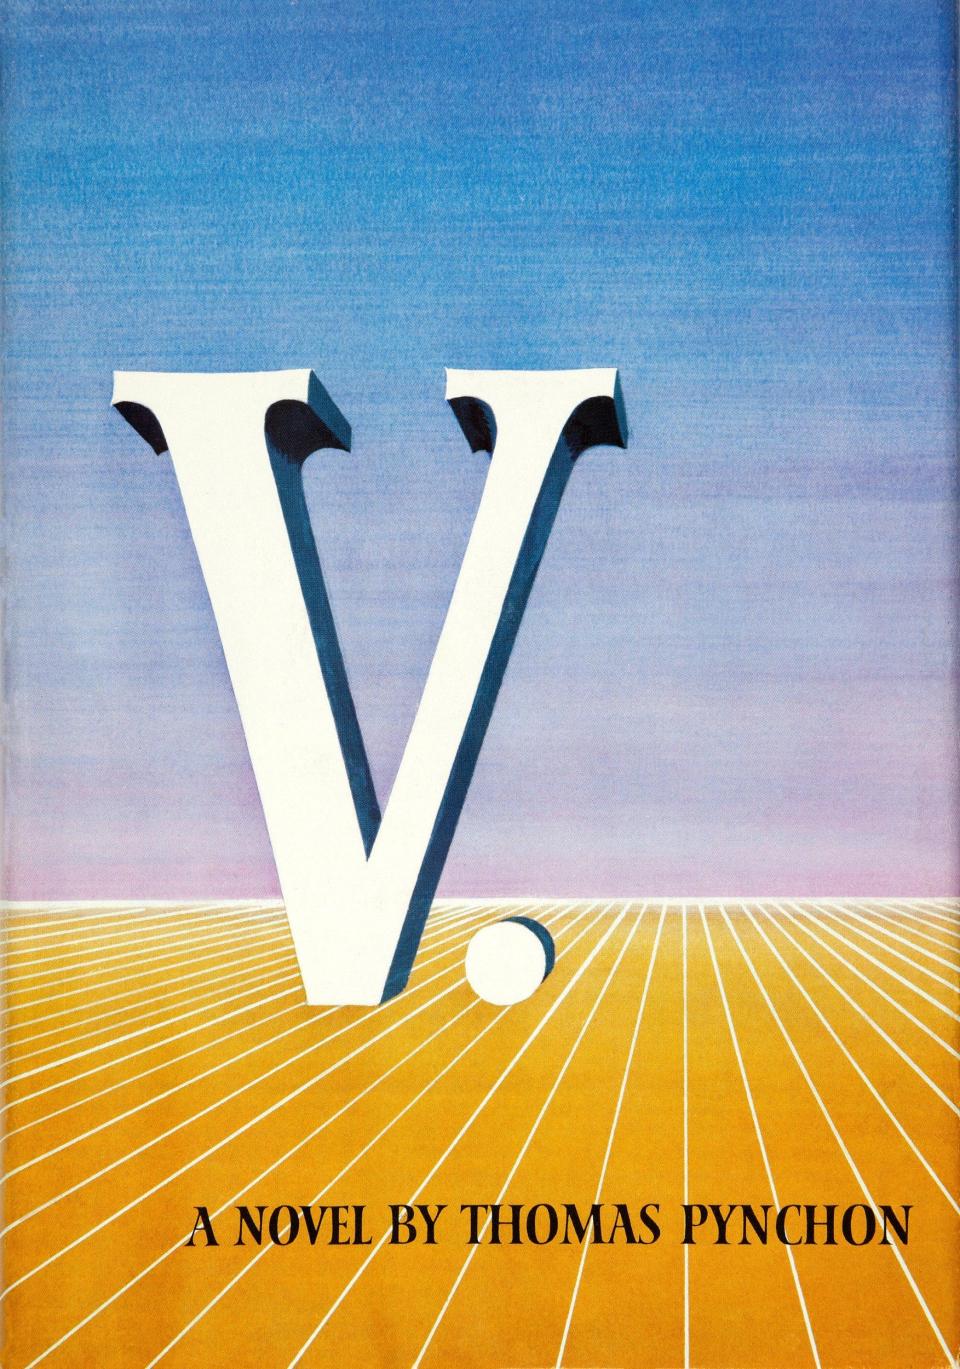 Thomas Pynchon's V., first published in England by Jonathan Cape in 1963